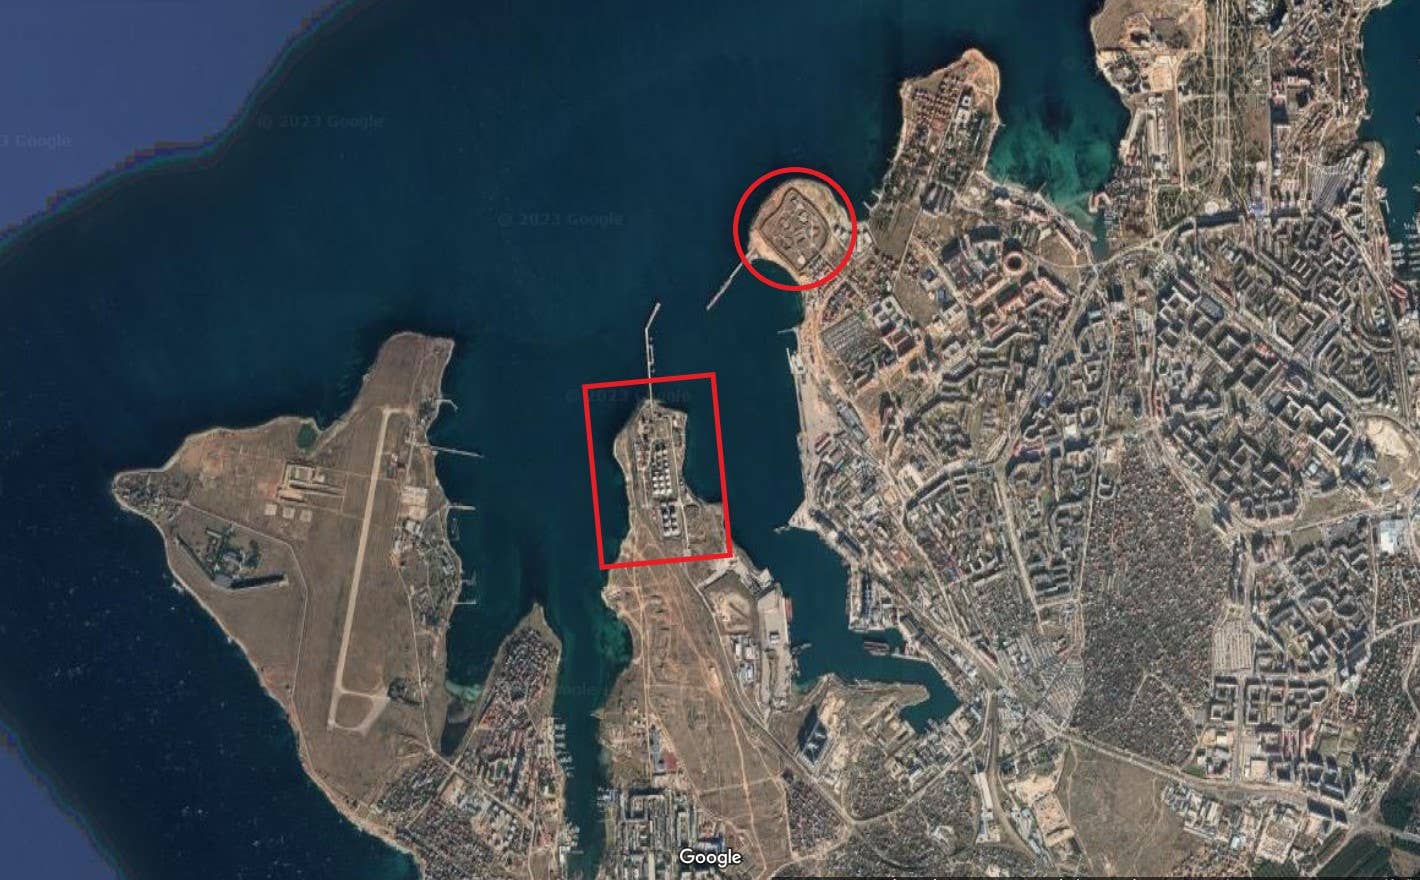 Several Russian military facilities surround the targeted fuel depot, among them the 810th Guards Naval Infantry Brigade's garrisons to the south and west, and the missile site to the northeast across the bay. <em>Google Maps</em>.